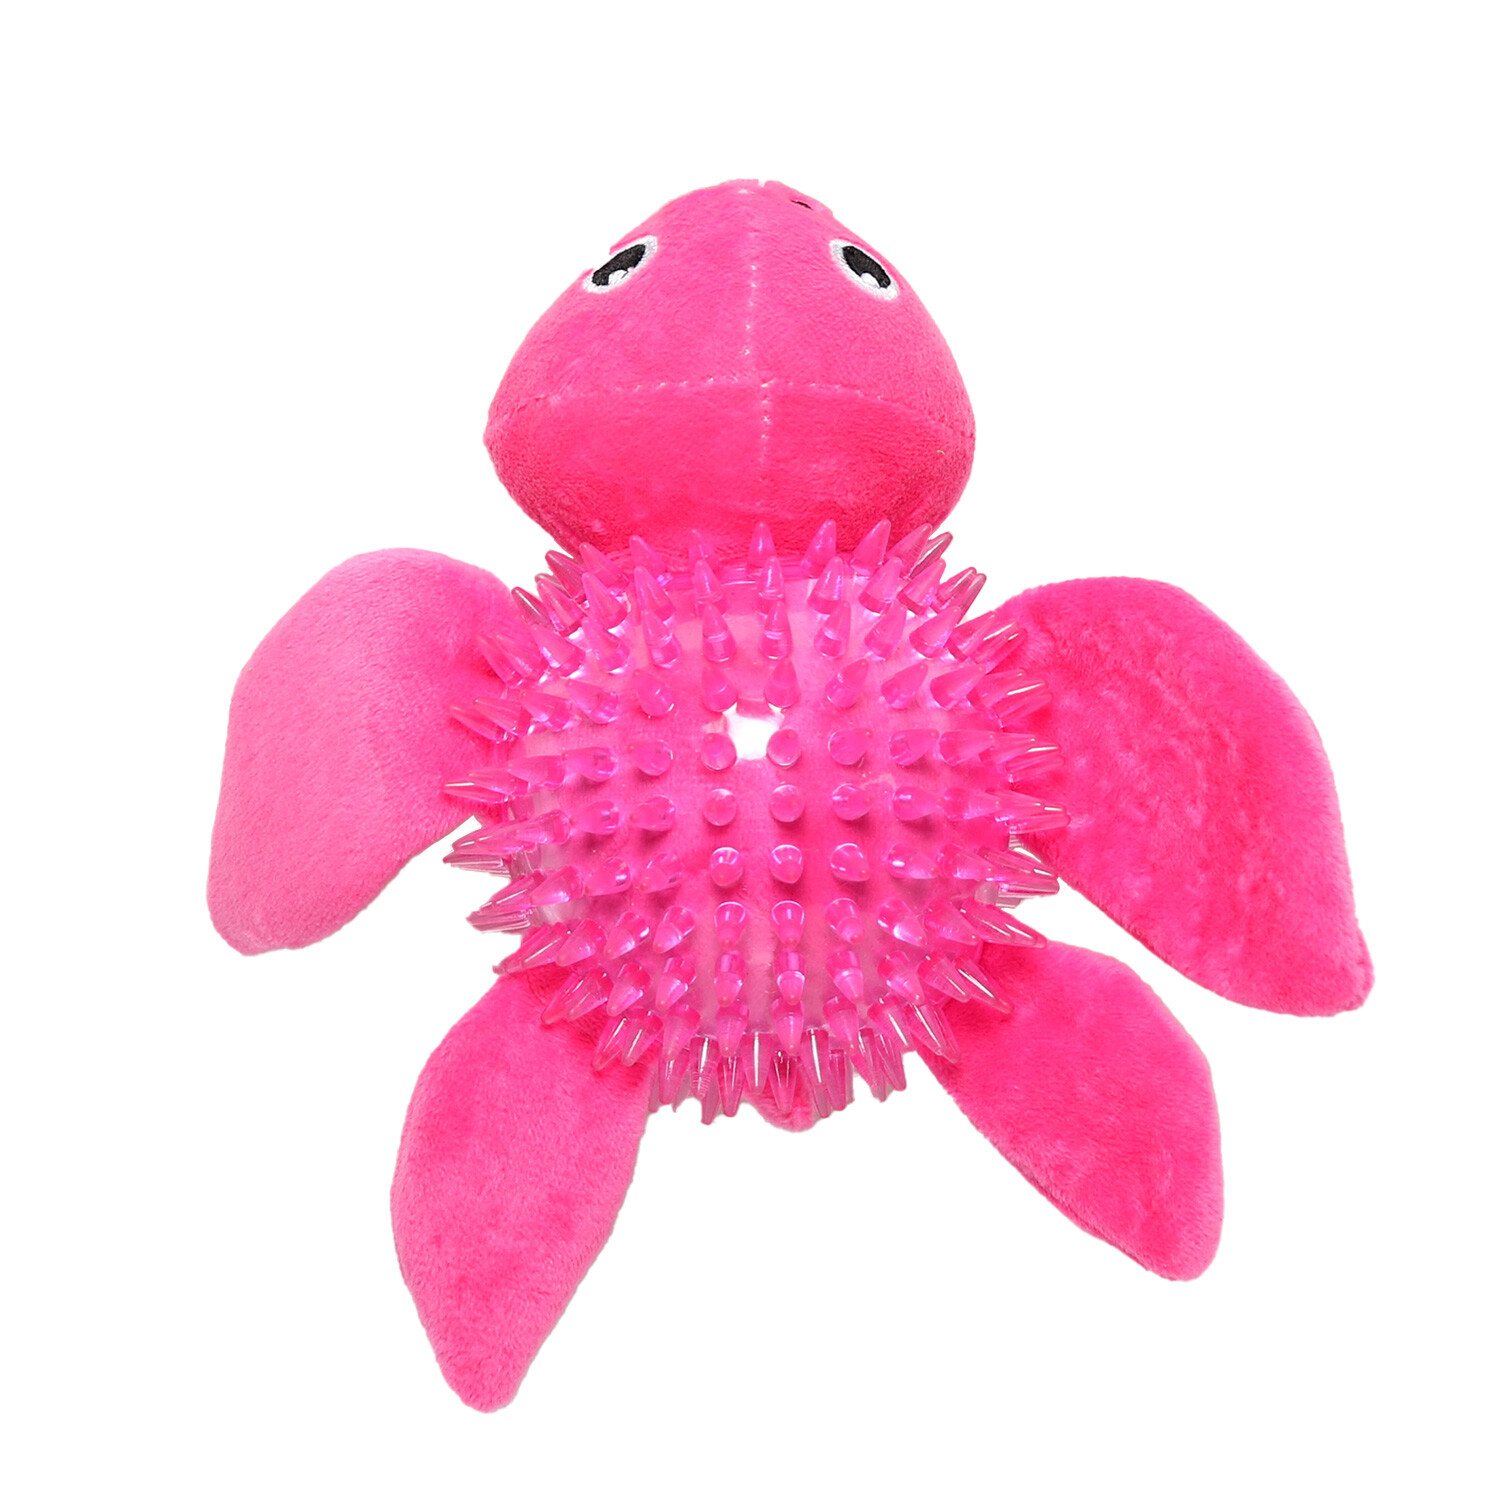 Spikey TPR Turtle Dog Toy Image 1